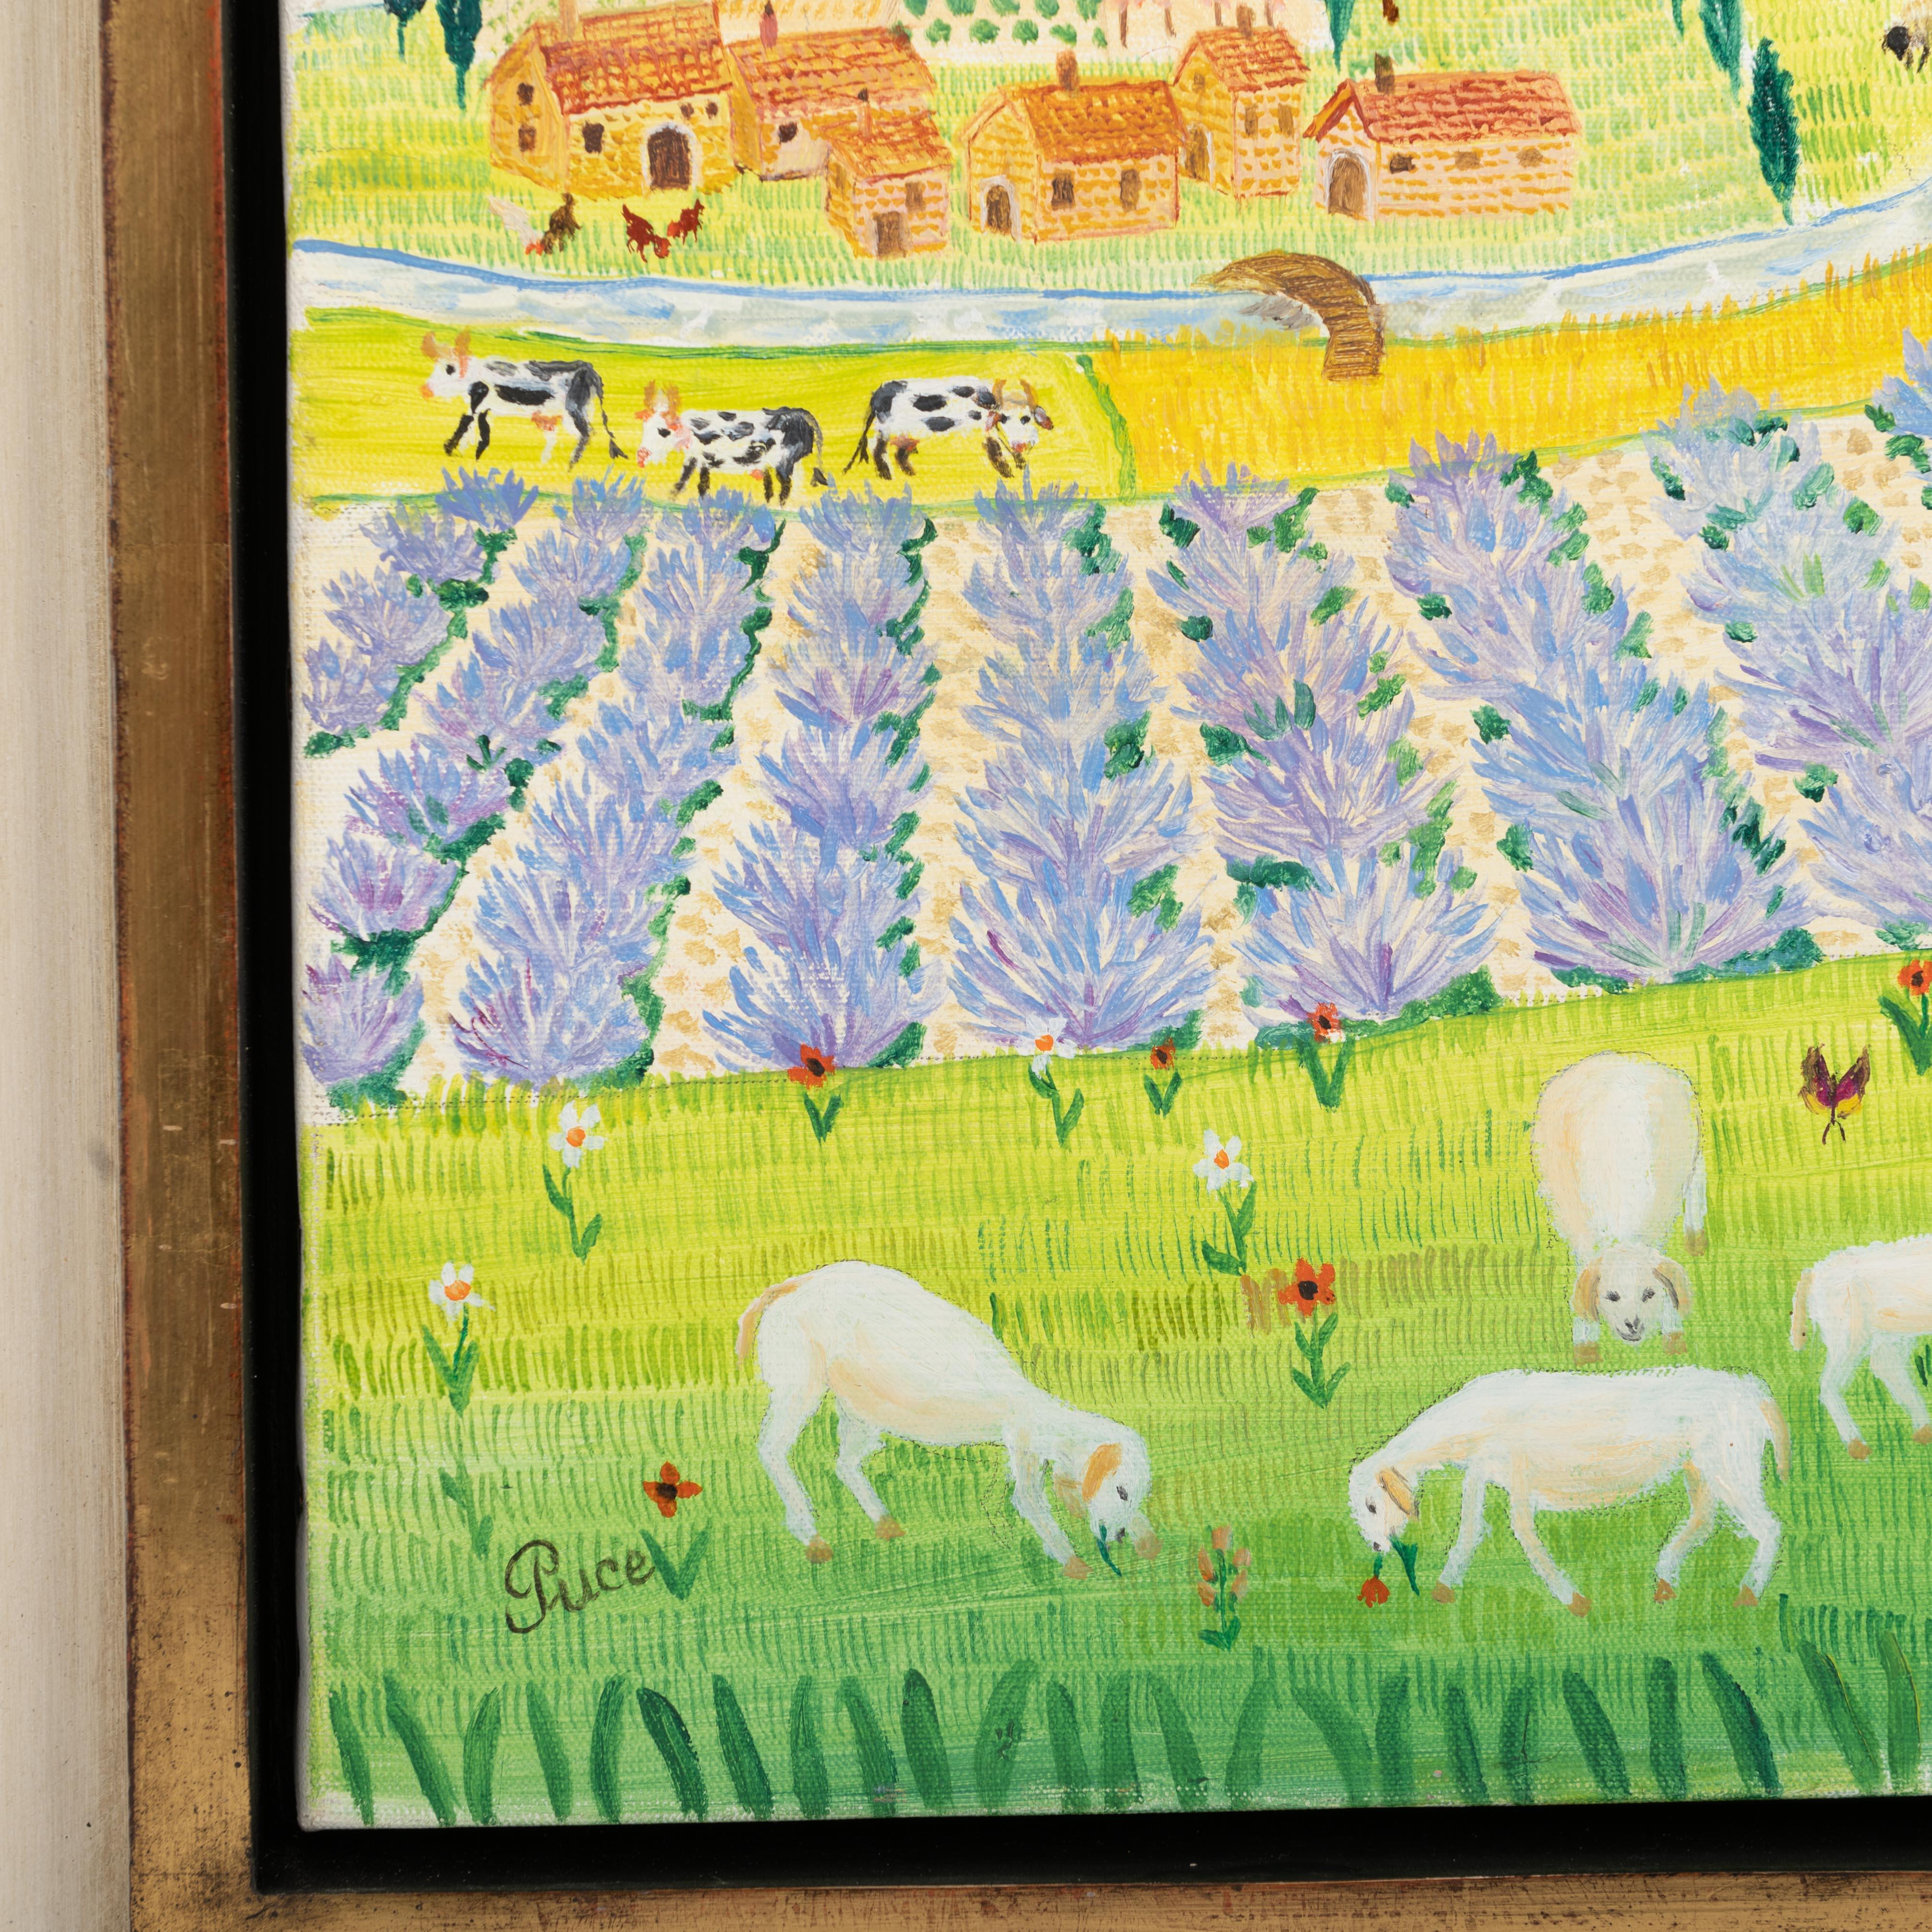 Folk Art Naive Illustrated Landscape in Bright Green-Yellow Colors by Nicole Fourcroy For Sale